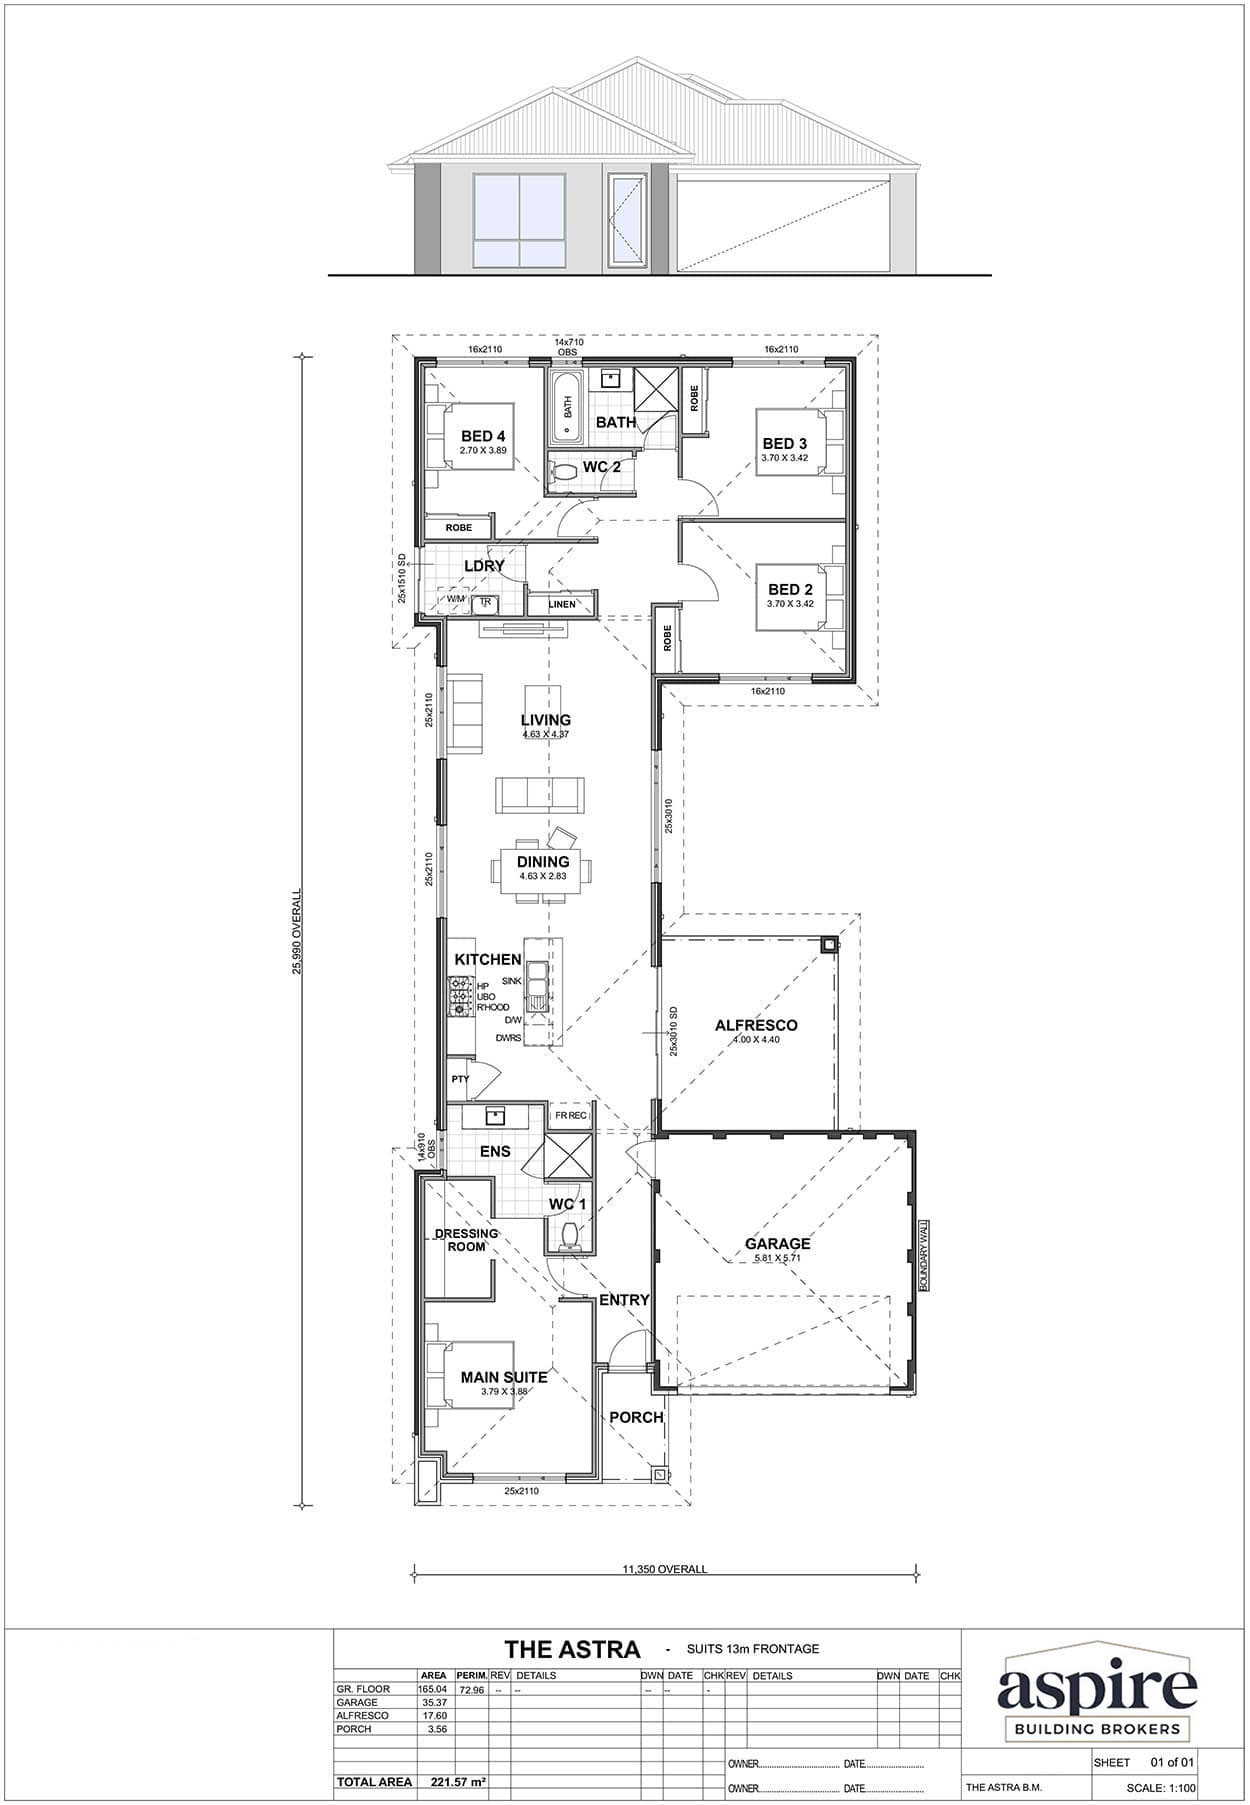 The Astra Floor Plan - Perth New Build Home Designs. 4 Bedrooms and 13m Block Width. Aspire Building Brokers